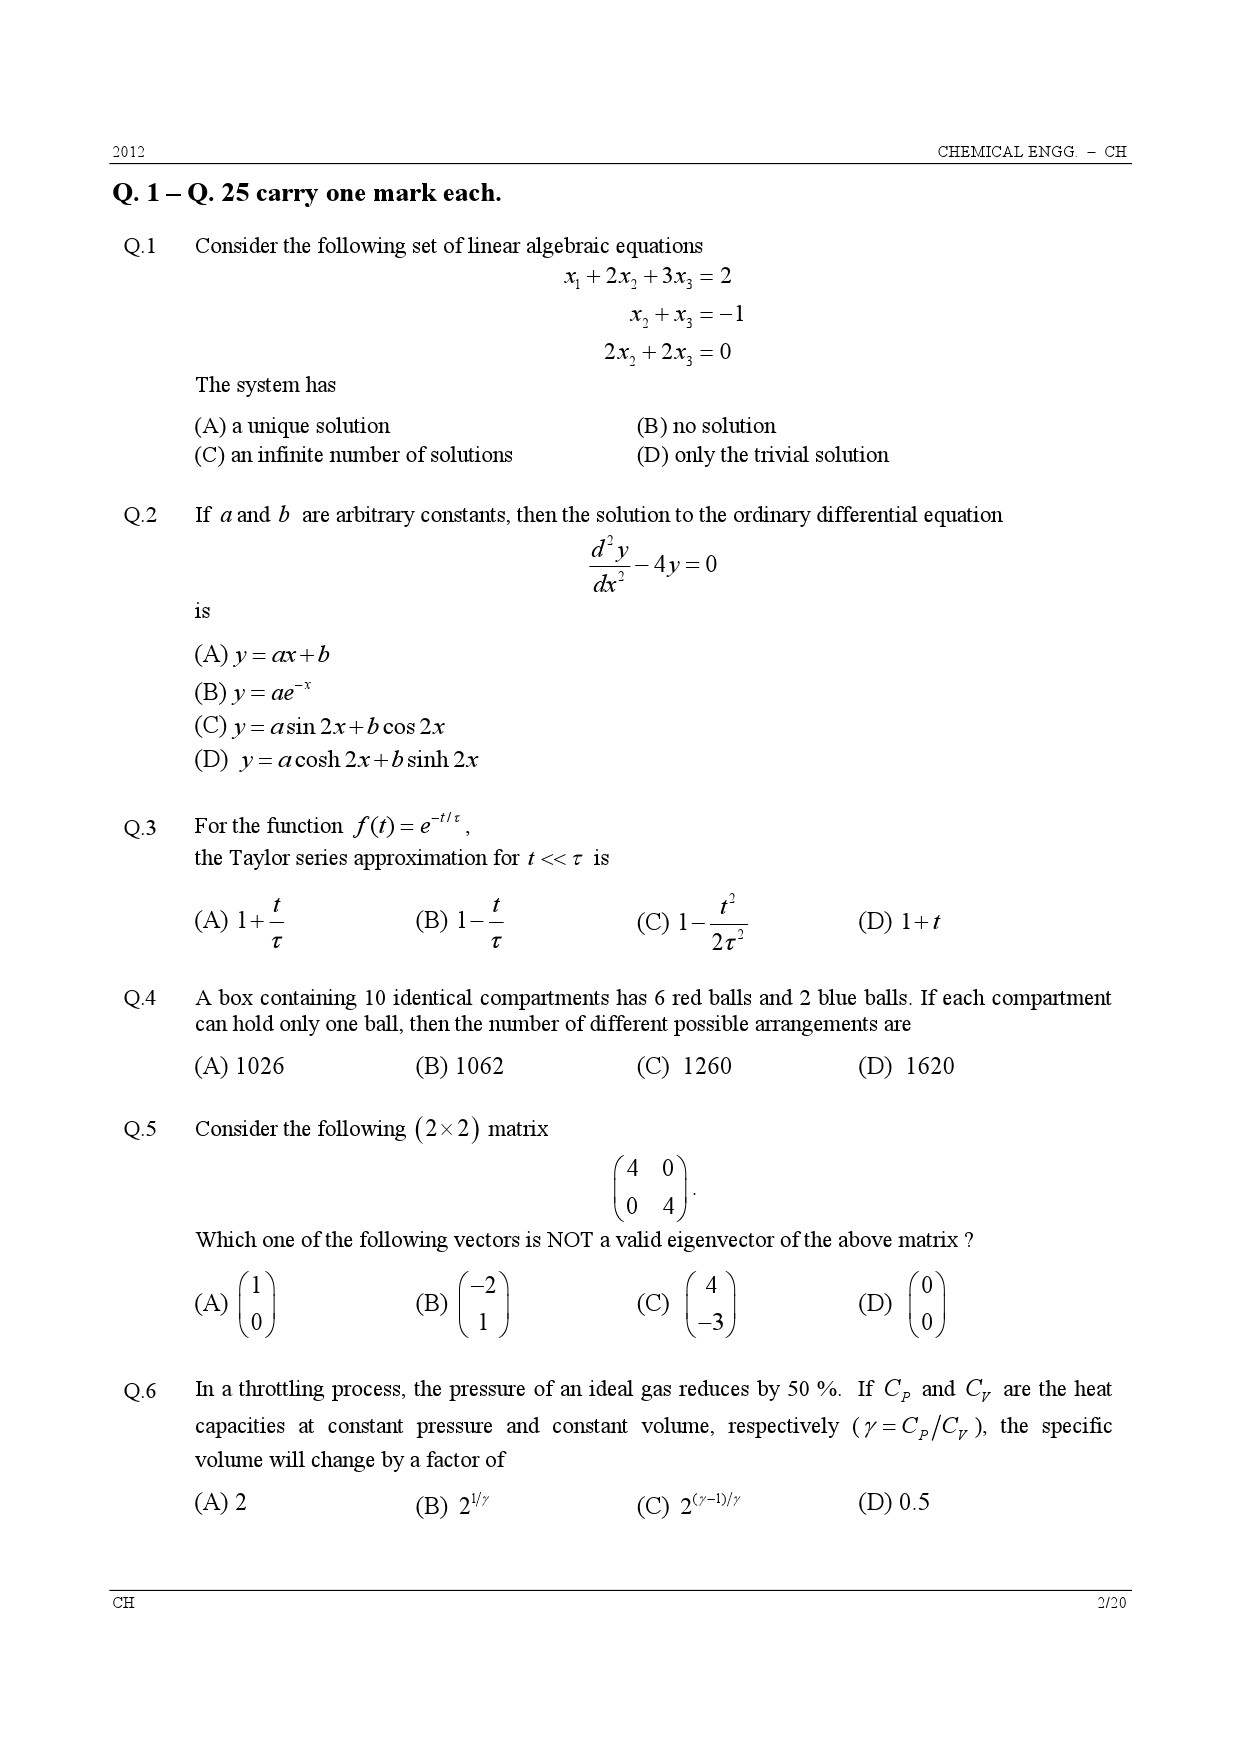 GATE Exam Question Paper 2012 Chemical Engineering 2